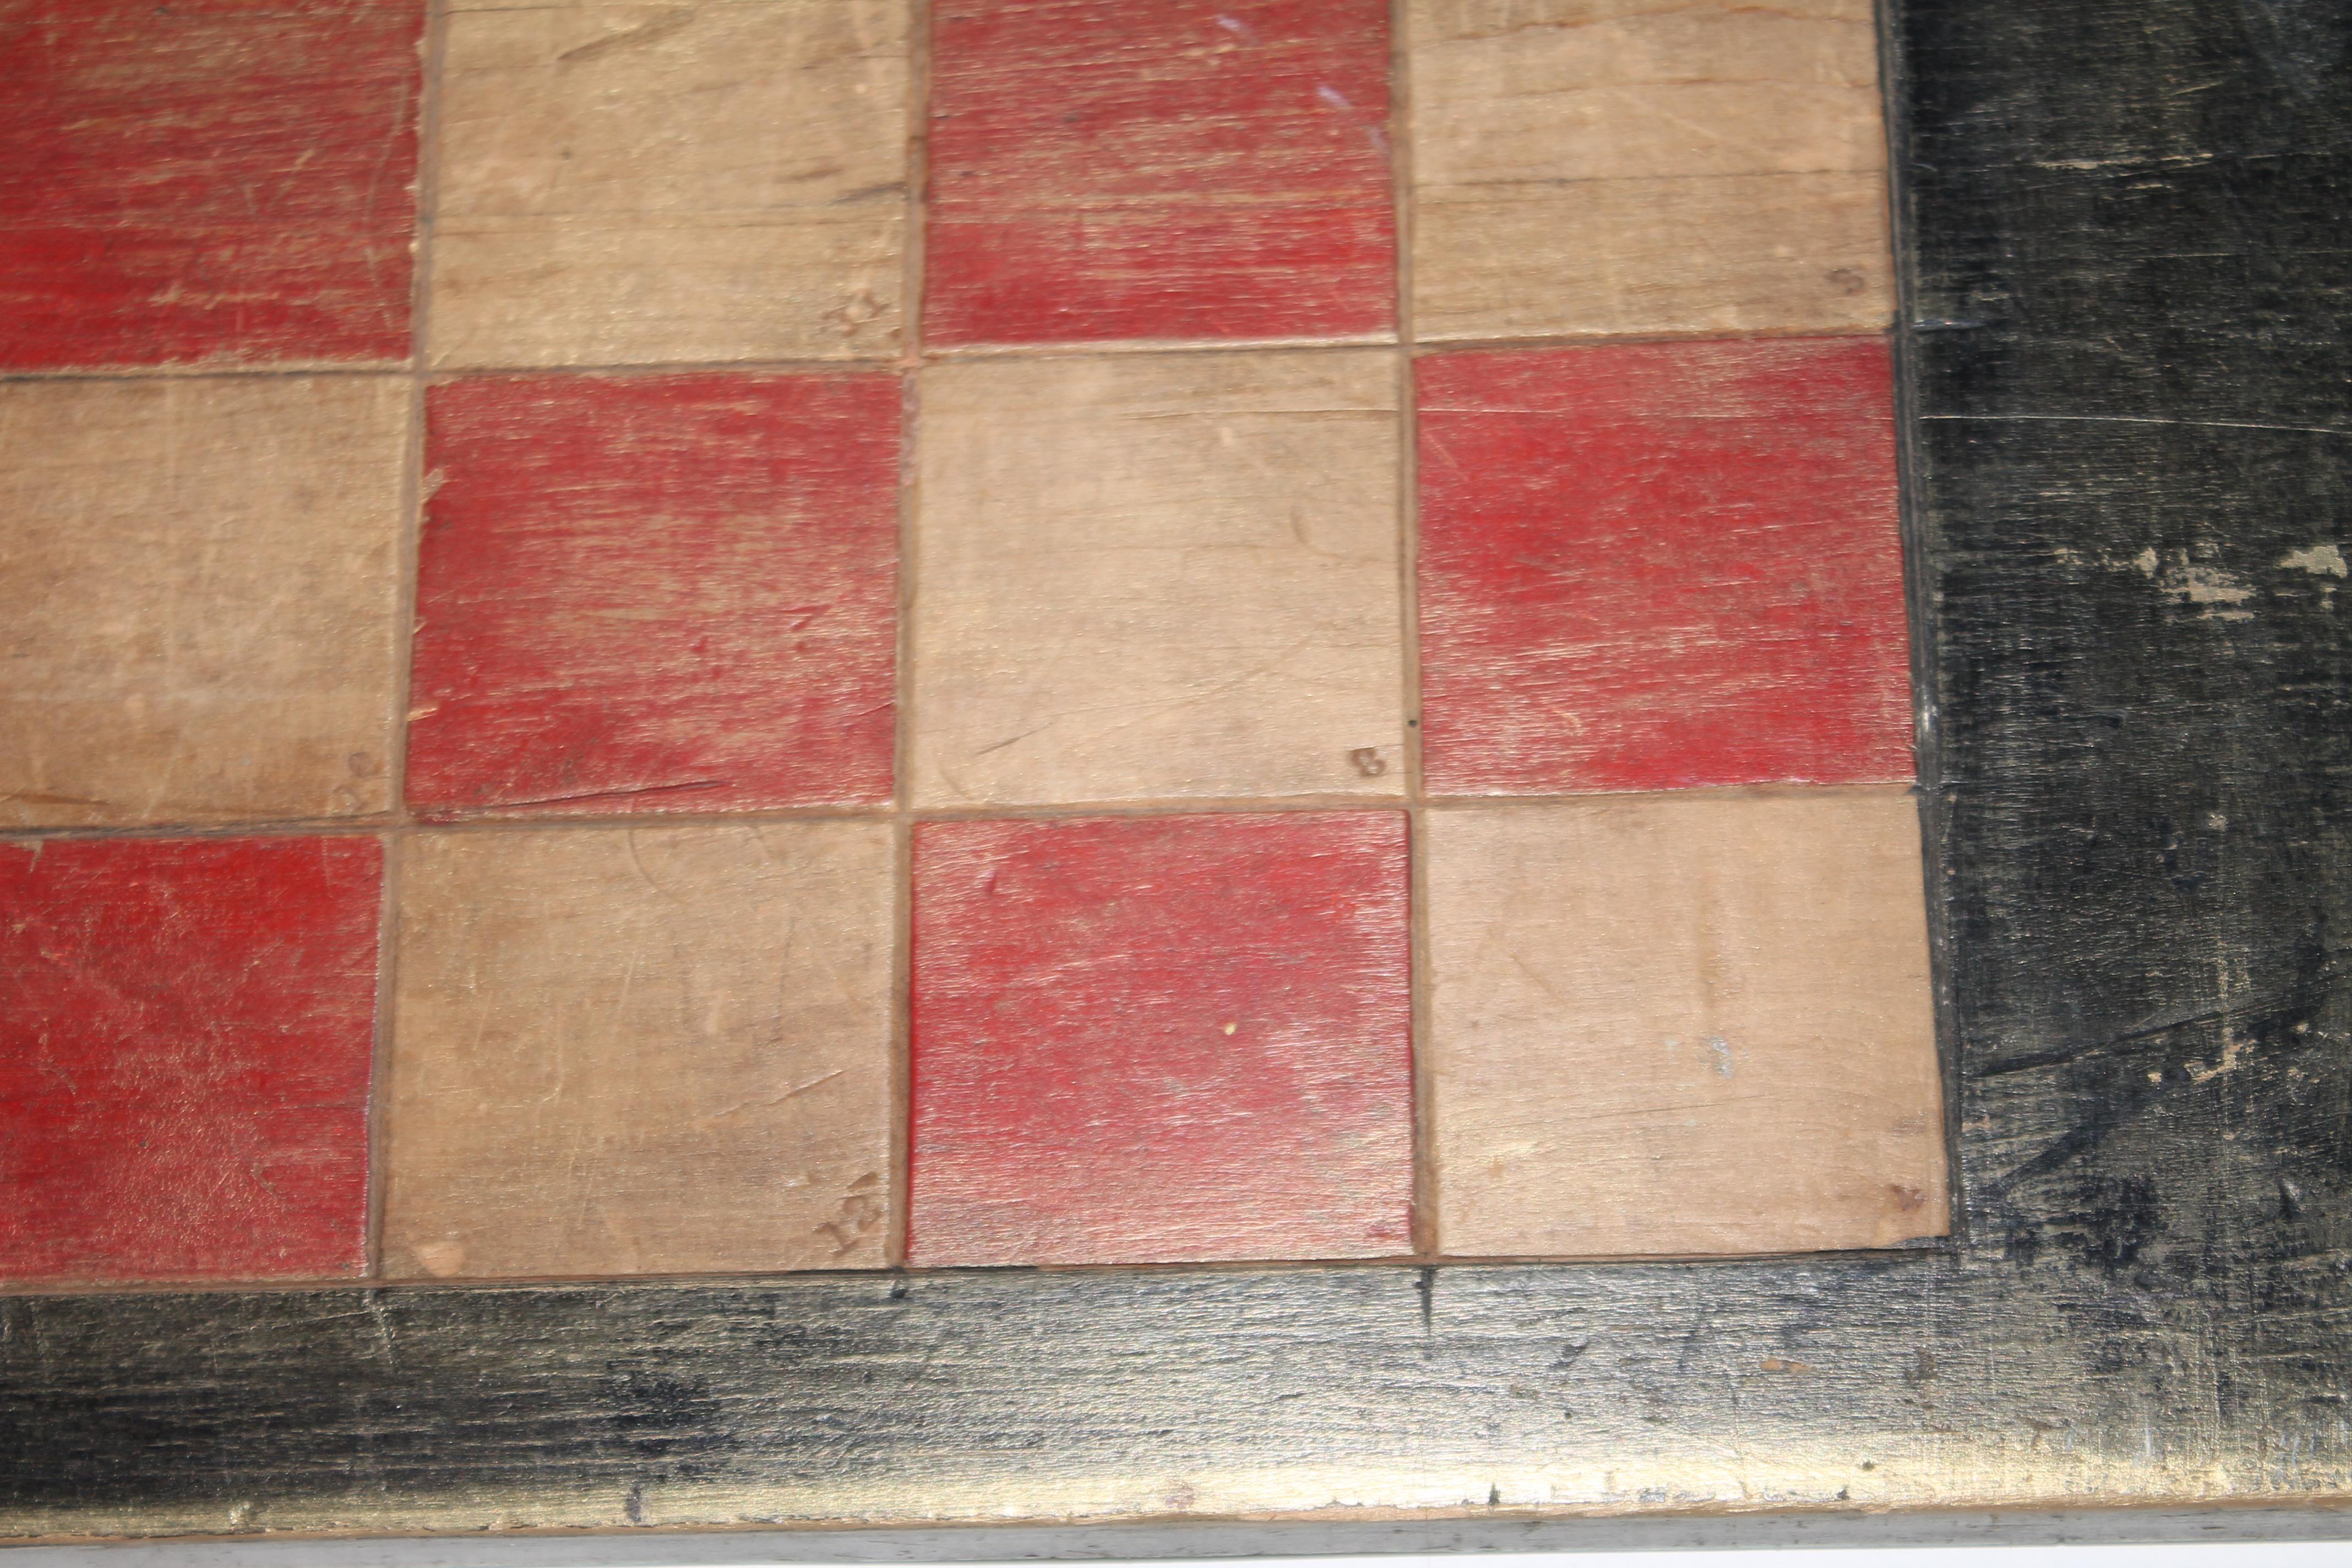 This folky double sided red and black game board has checkers board on one side and numbers game on the other. The condition is good with wear and patina from age and use.